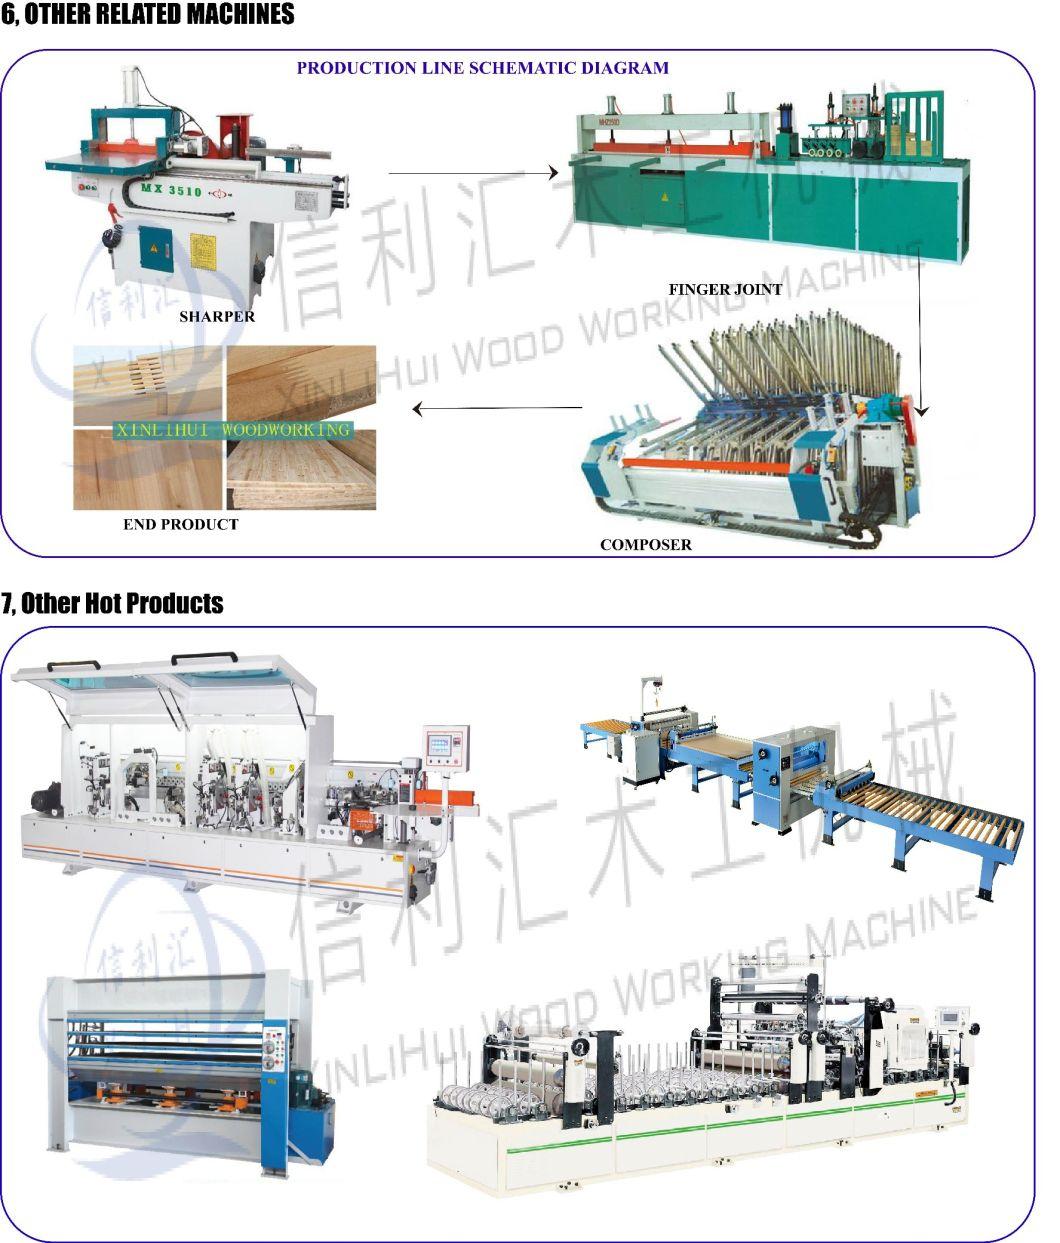 Finger Jointing Machine Cutter Mxb3518, Smallness Woodblock Process Equipment/ Finger Joint Production Process with Double Blades